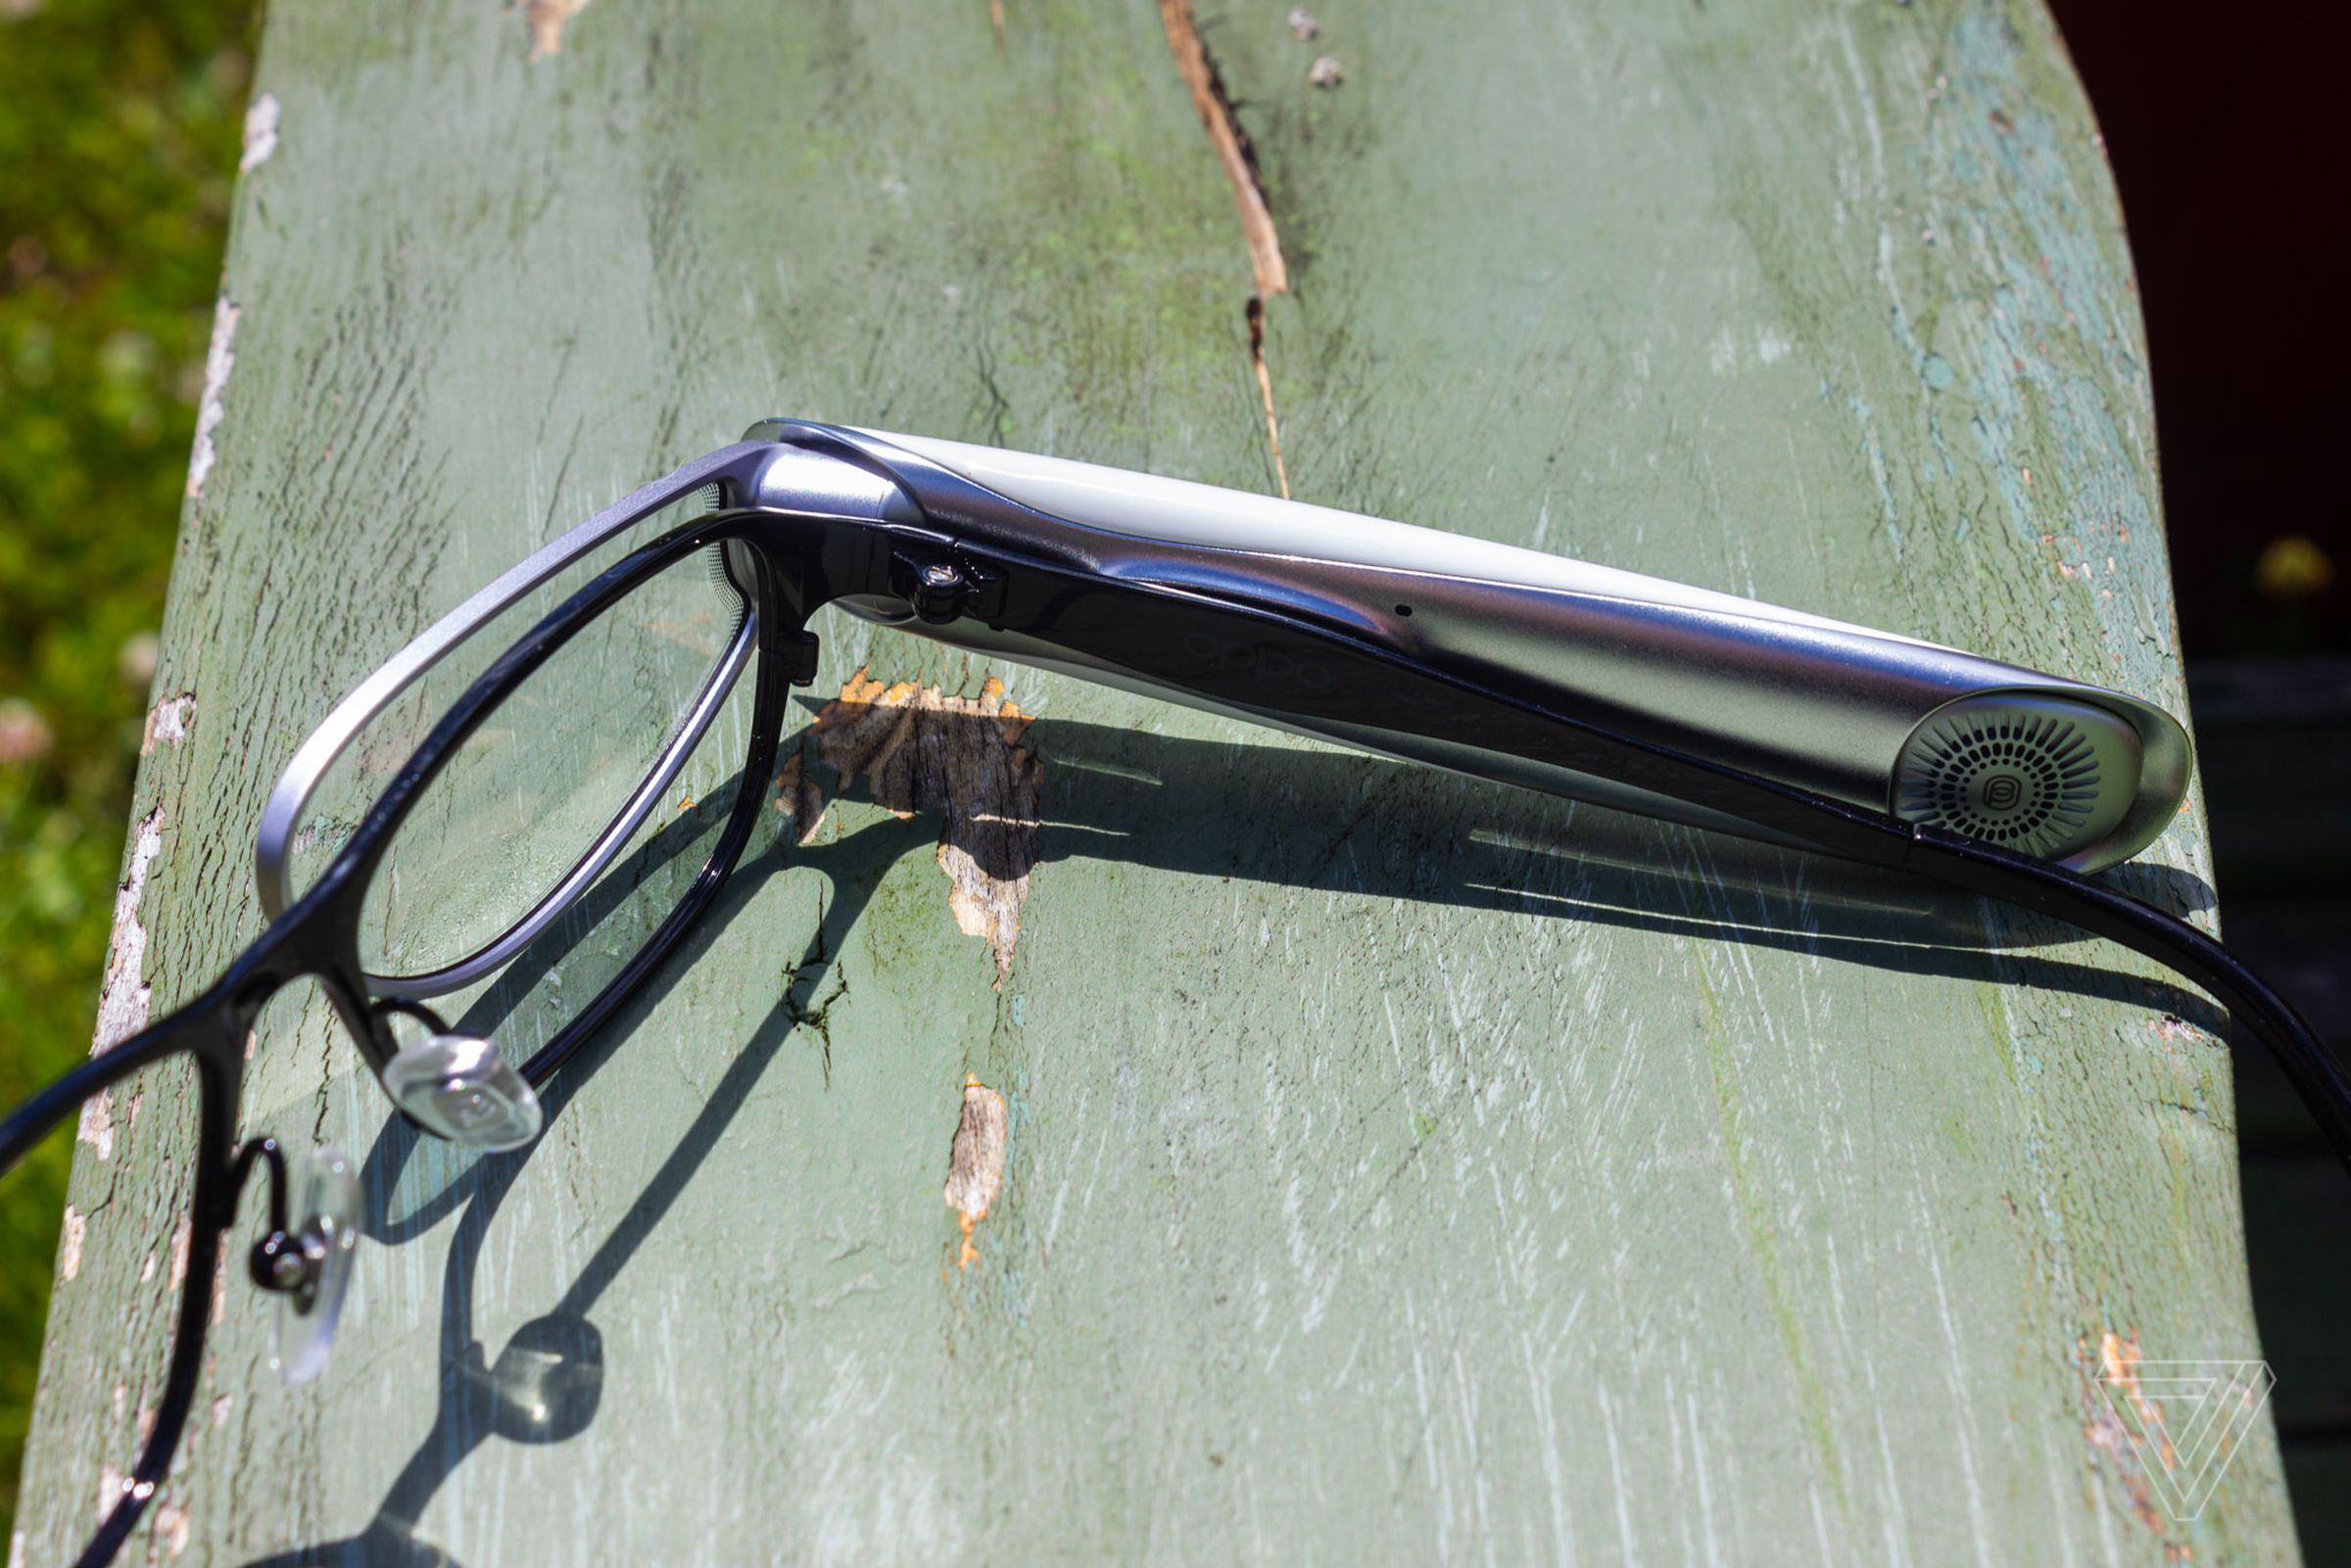 A side view of a pair of Oppo AR glasses